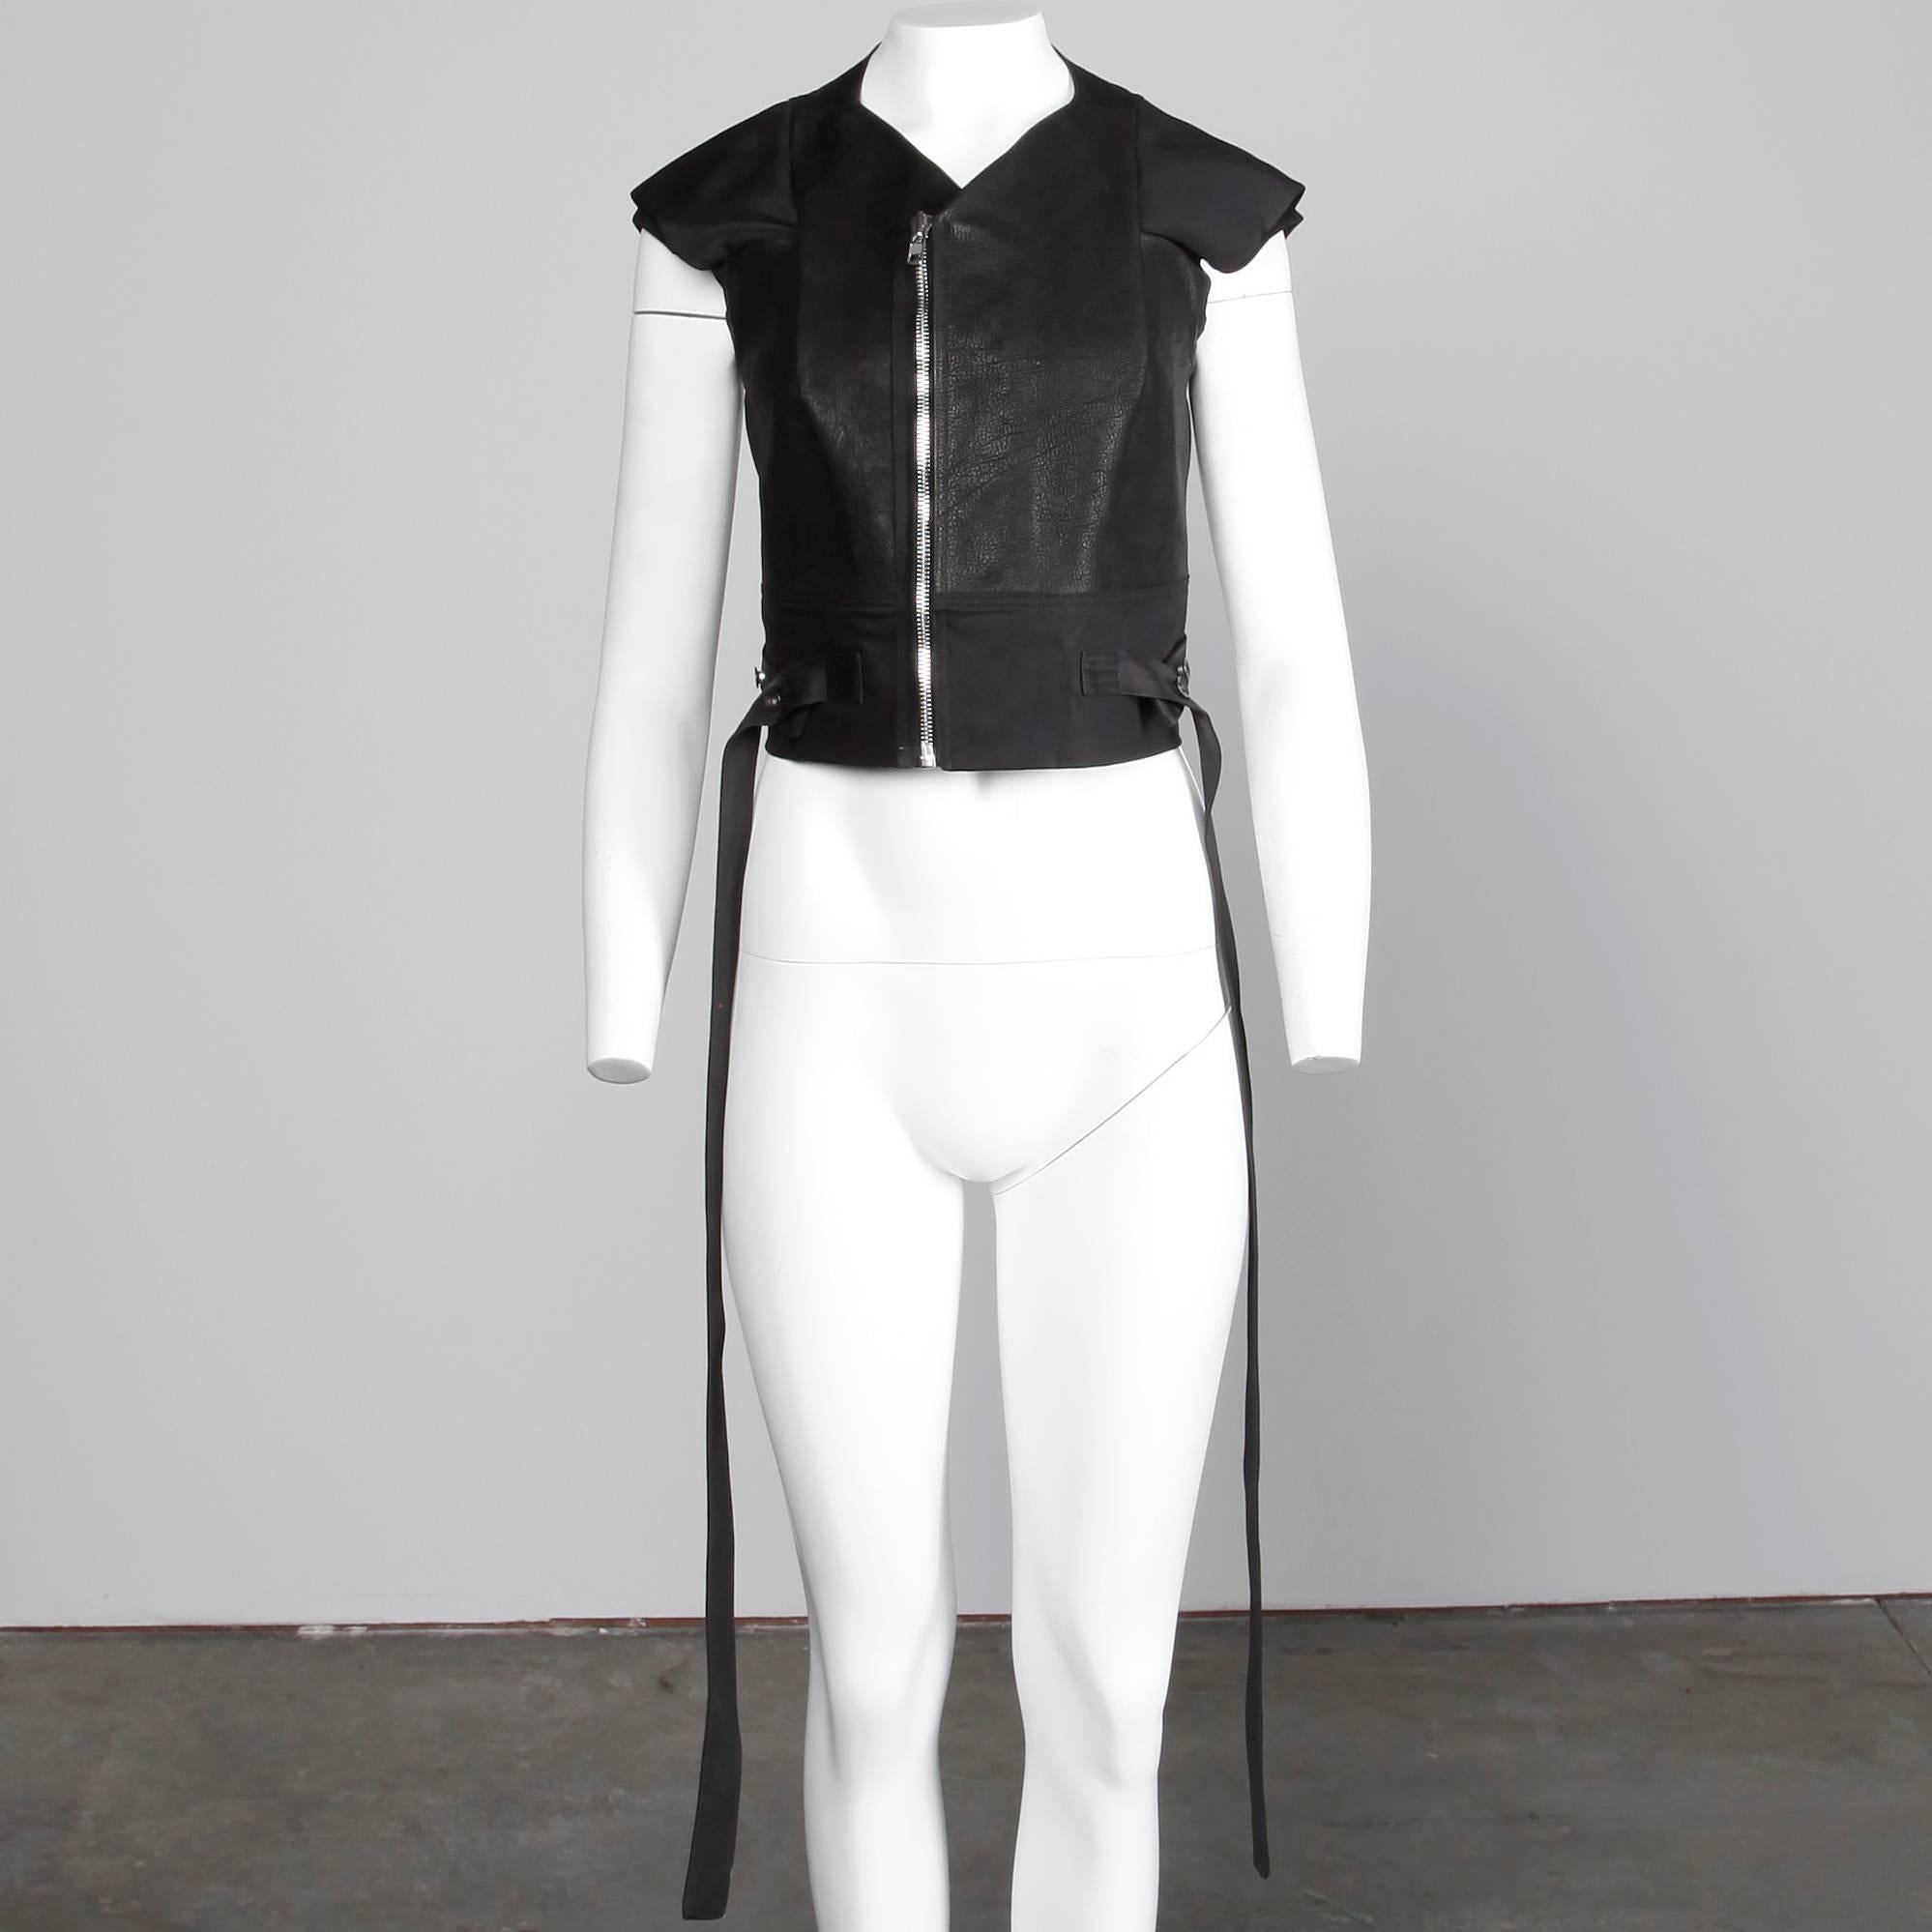 Unworn with the original tags still attached from S/S 2015! Rick Owens leather jacket or vest with unique sleeves and asymmetric zipper. Fully lined with front zip closure. 100% calf leather, 97% cotton, 3% spandex. The marked size is I 44/ GB 12/